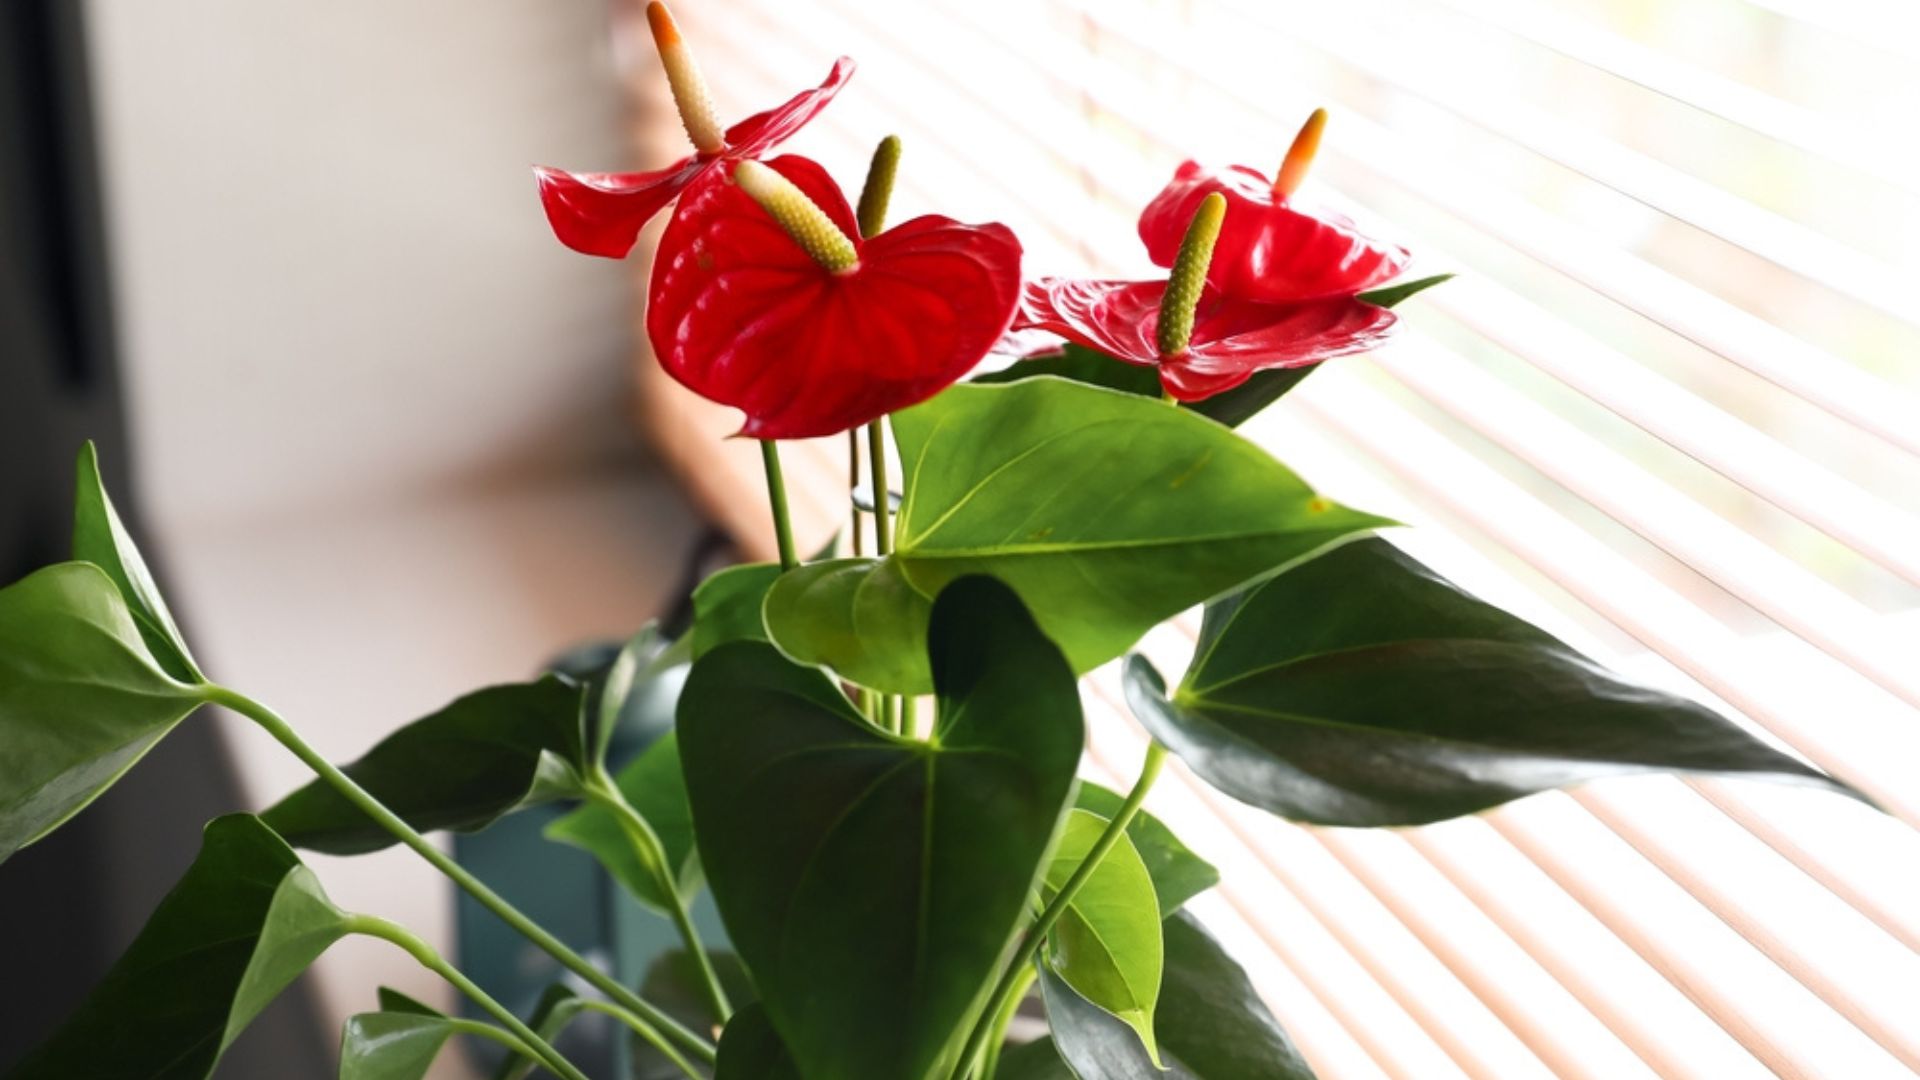 Make Your Anthurium Flourish And Produce More Stunning Blooms With These Brilliant Fertilizing Tips